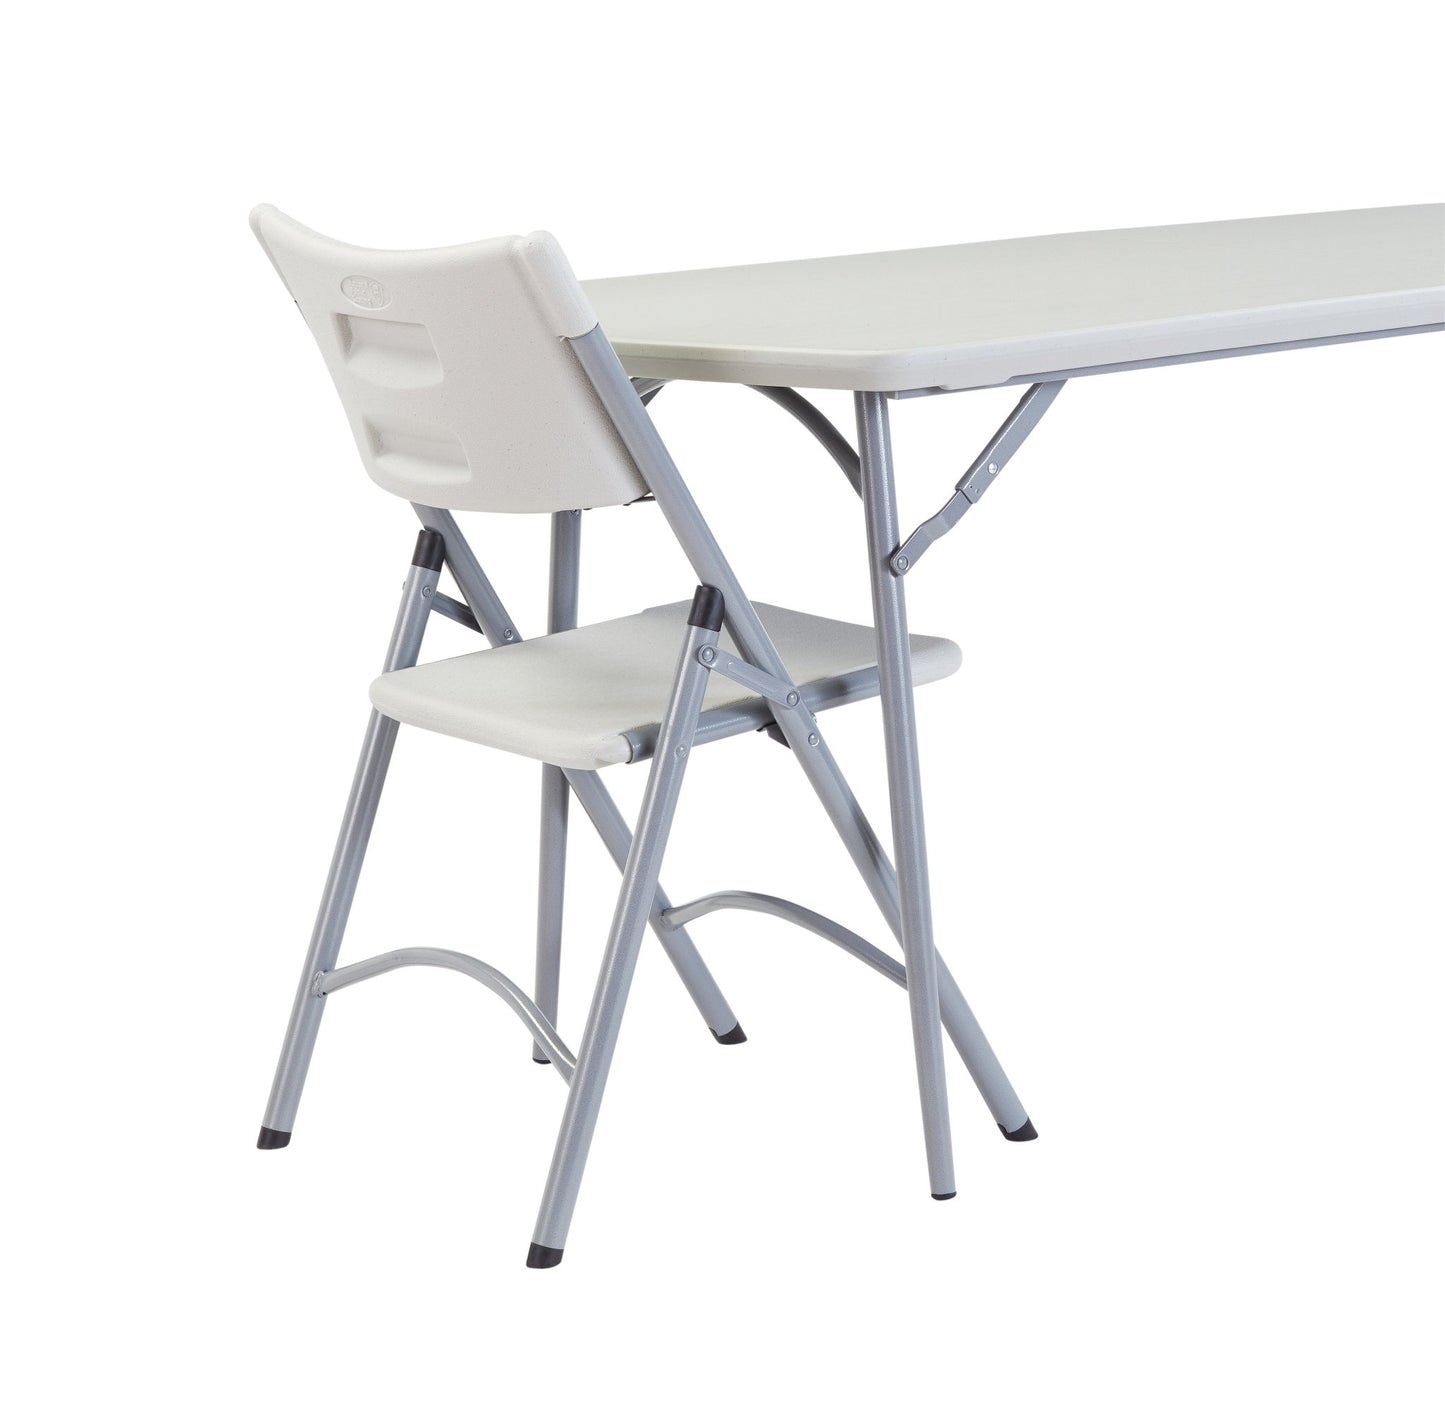 NPS Rectangular Fold-In-Half Table - 30"L x 72"W (National Public Seating NPS-BMFIH3072) - SchoolOutlet